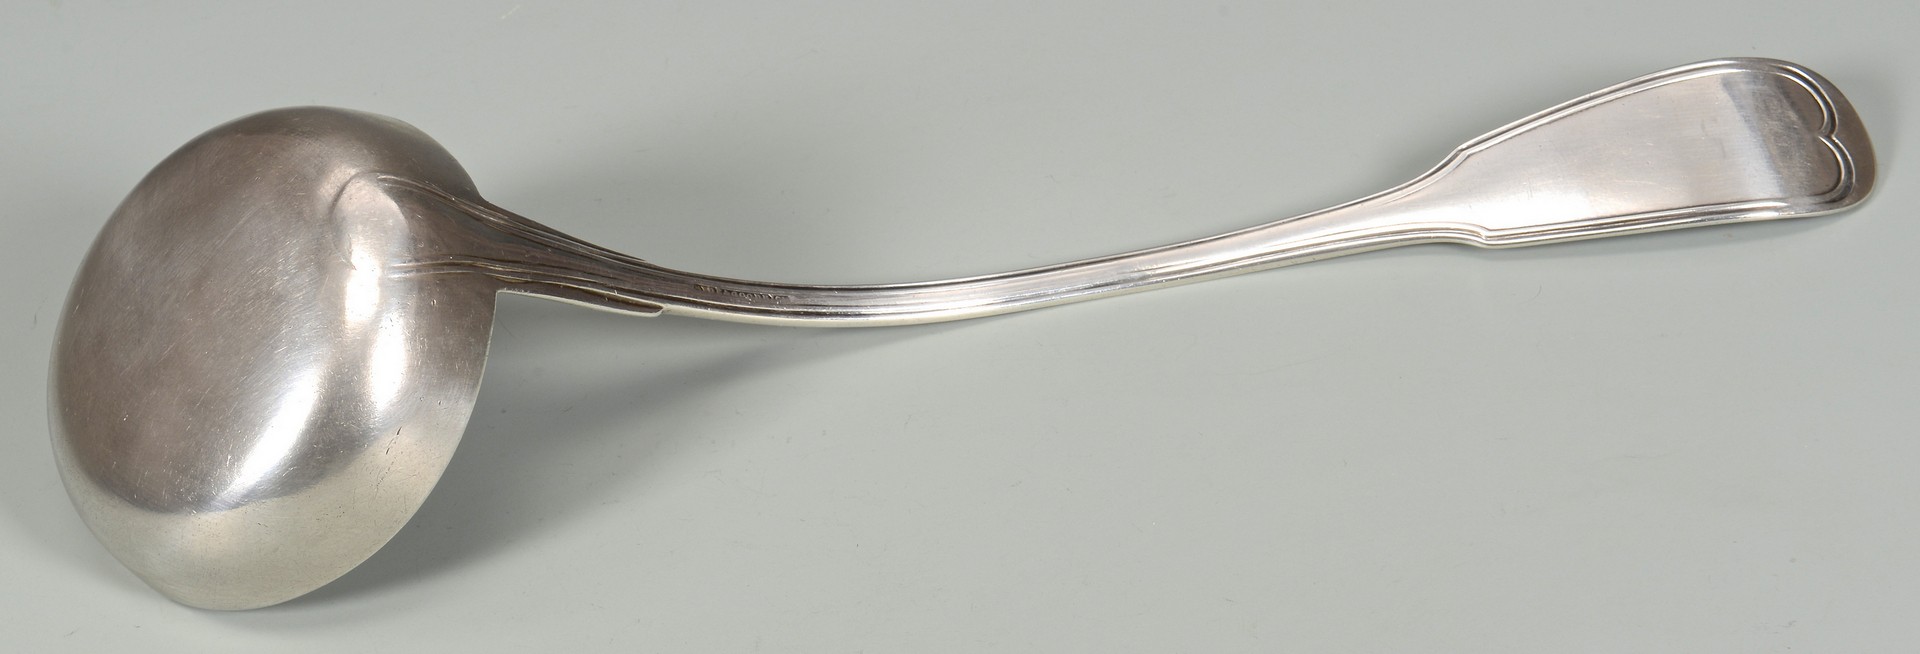 Lot 66: Hyde & Goodrich Coin Silver Ladle, New Orleans